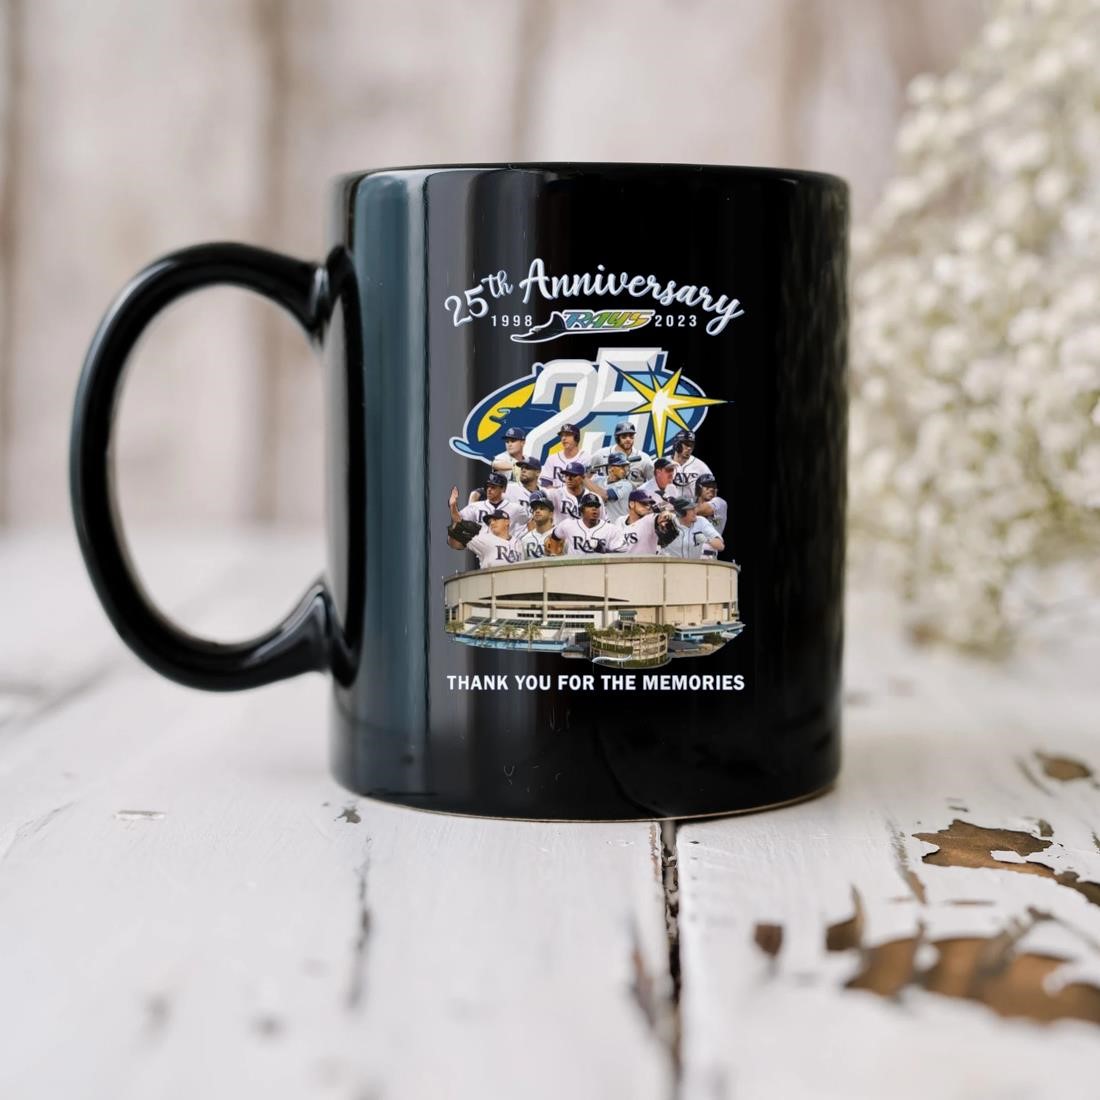 Tampa Bay Devil Rays 25th Anniversary 1998 2023 Thank You For The